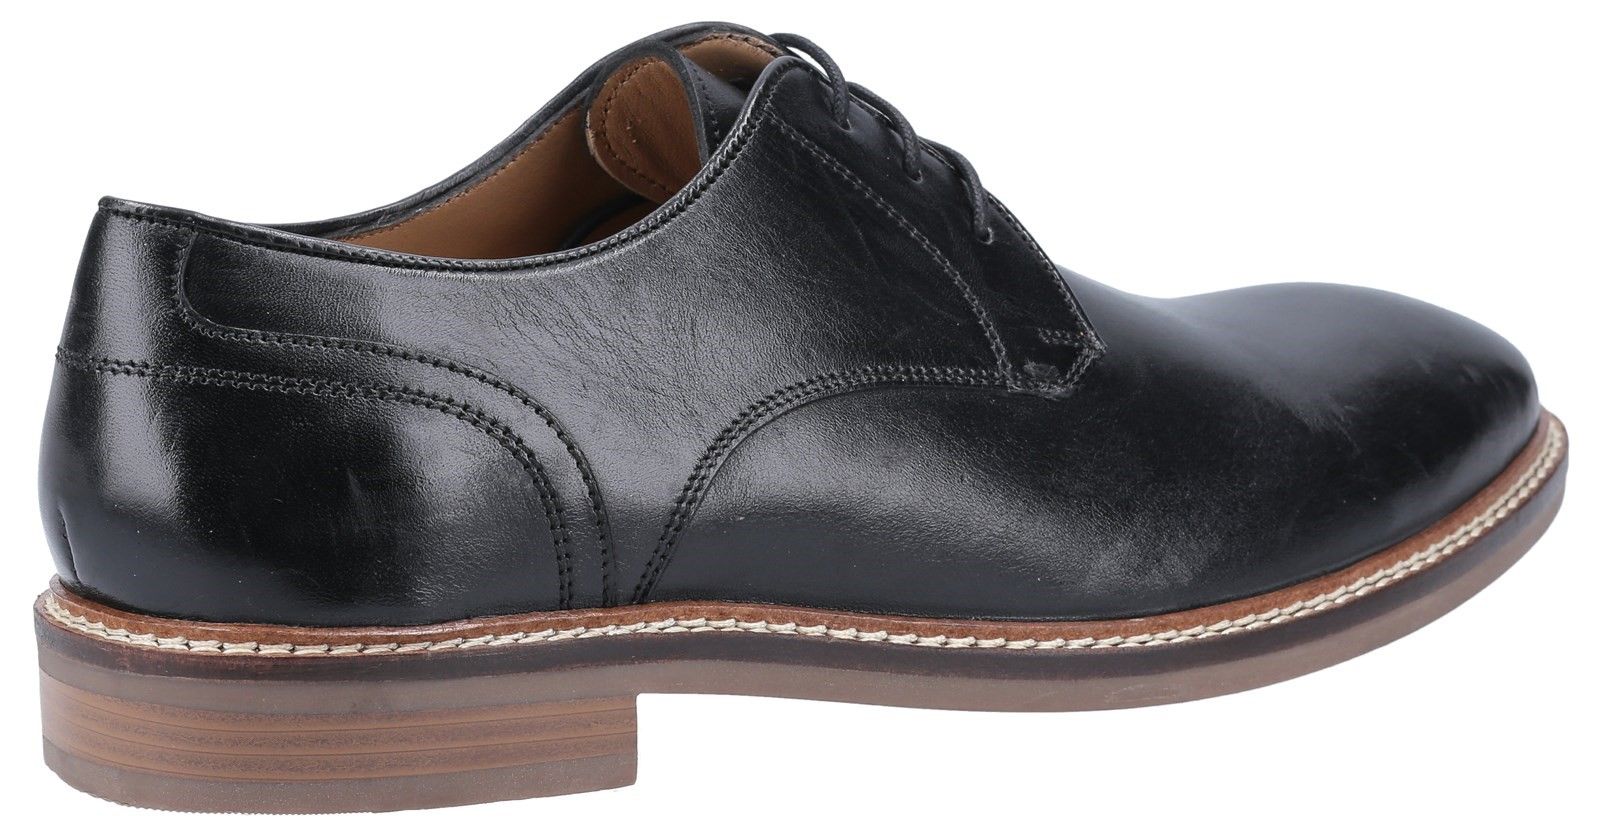 Men's plain-toe derby; Brayden is crafted with leather and has a comfortable cushioned memory foam leather footbed. The hardwearing flexible sole unit makes this the perfect smart all day footwear.Leather upper. 
Leather lining. 
Cushion comfort memory foam leather sock. 
Flexible TPR sole with stacked effect heel and stitched leather rand detail.